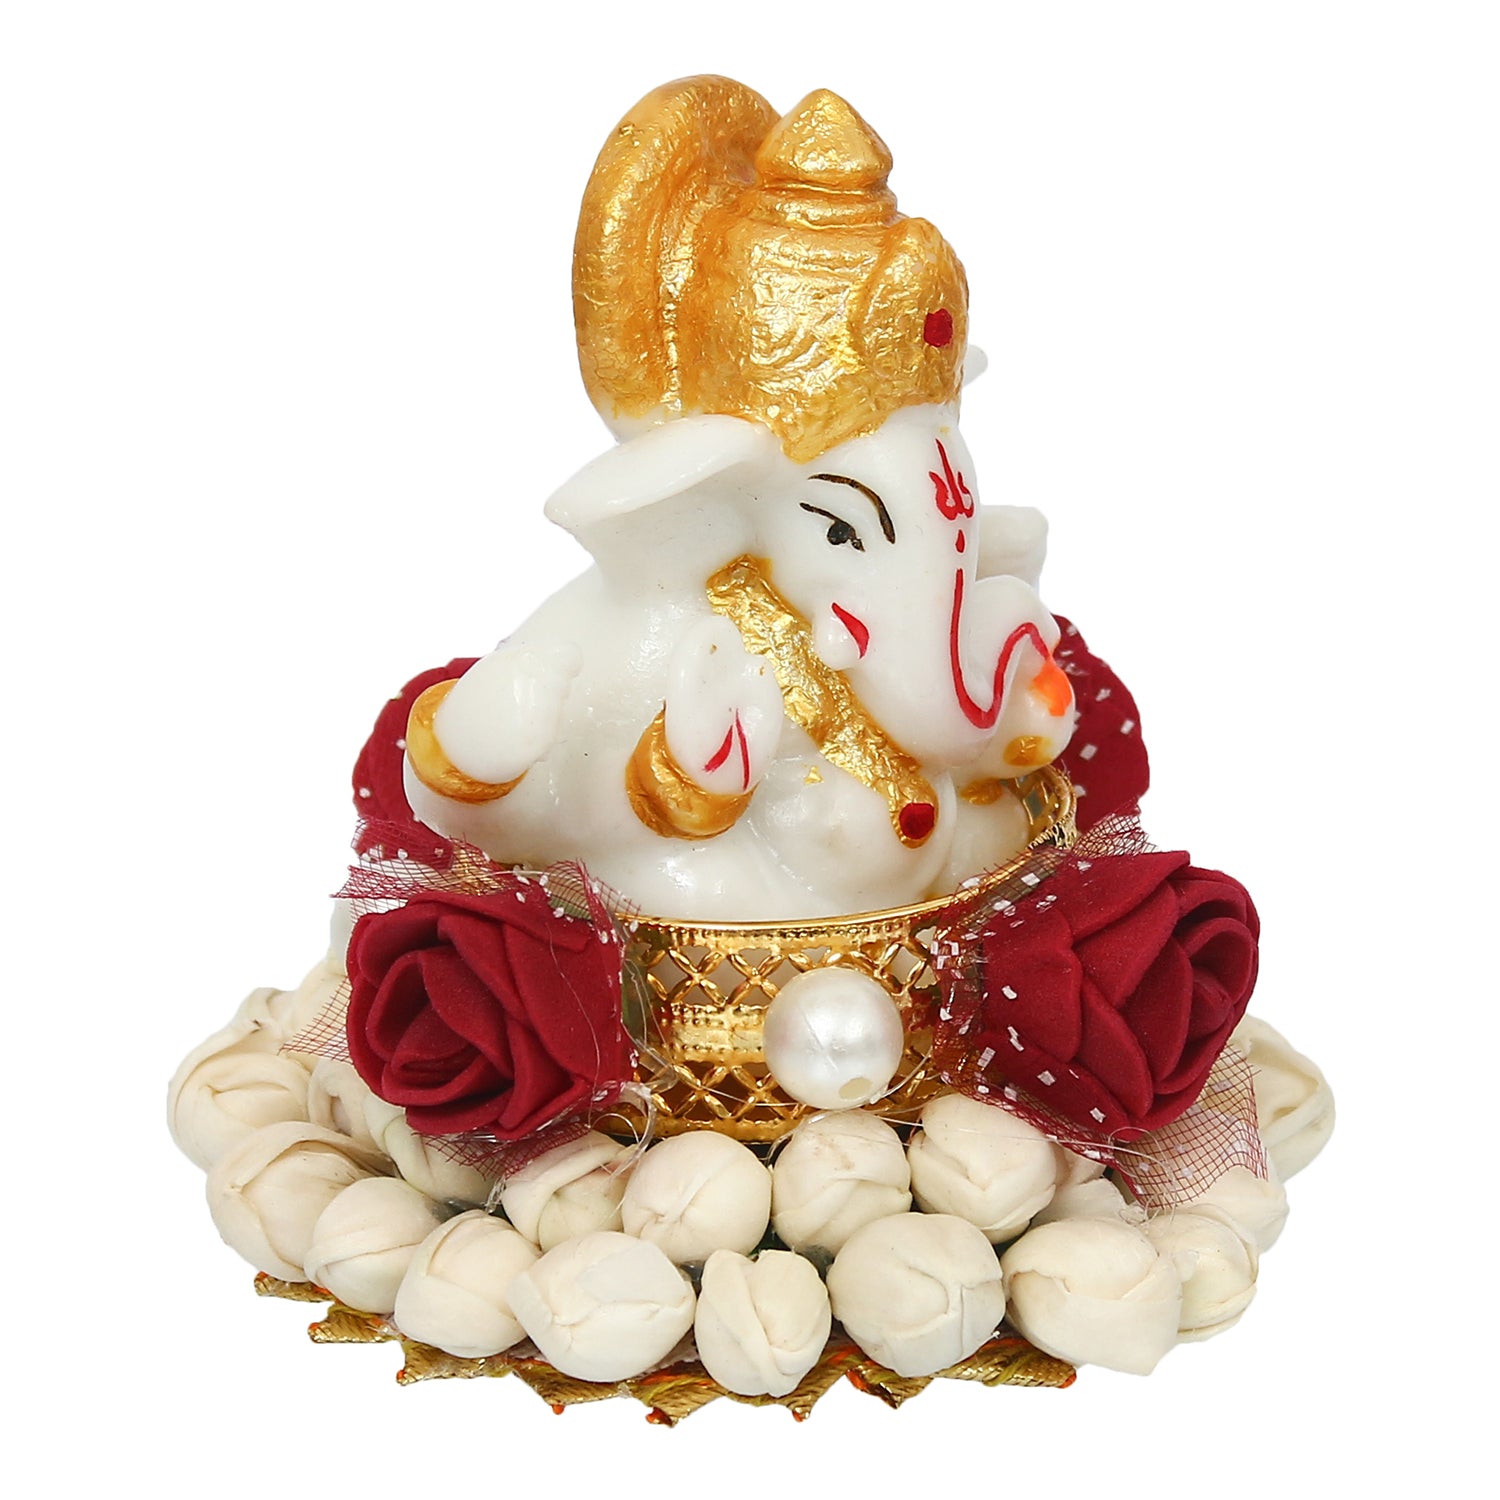 Lord Ganesha Idol On Decorative Handicrafted Plate For Home And Car Dashboard 3